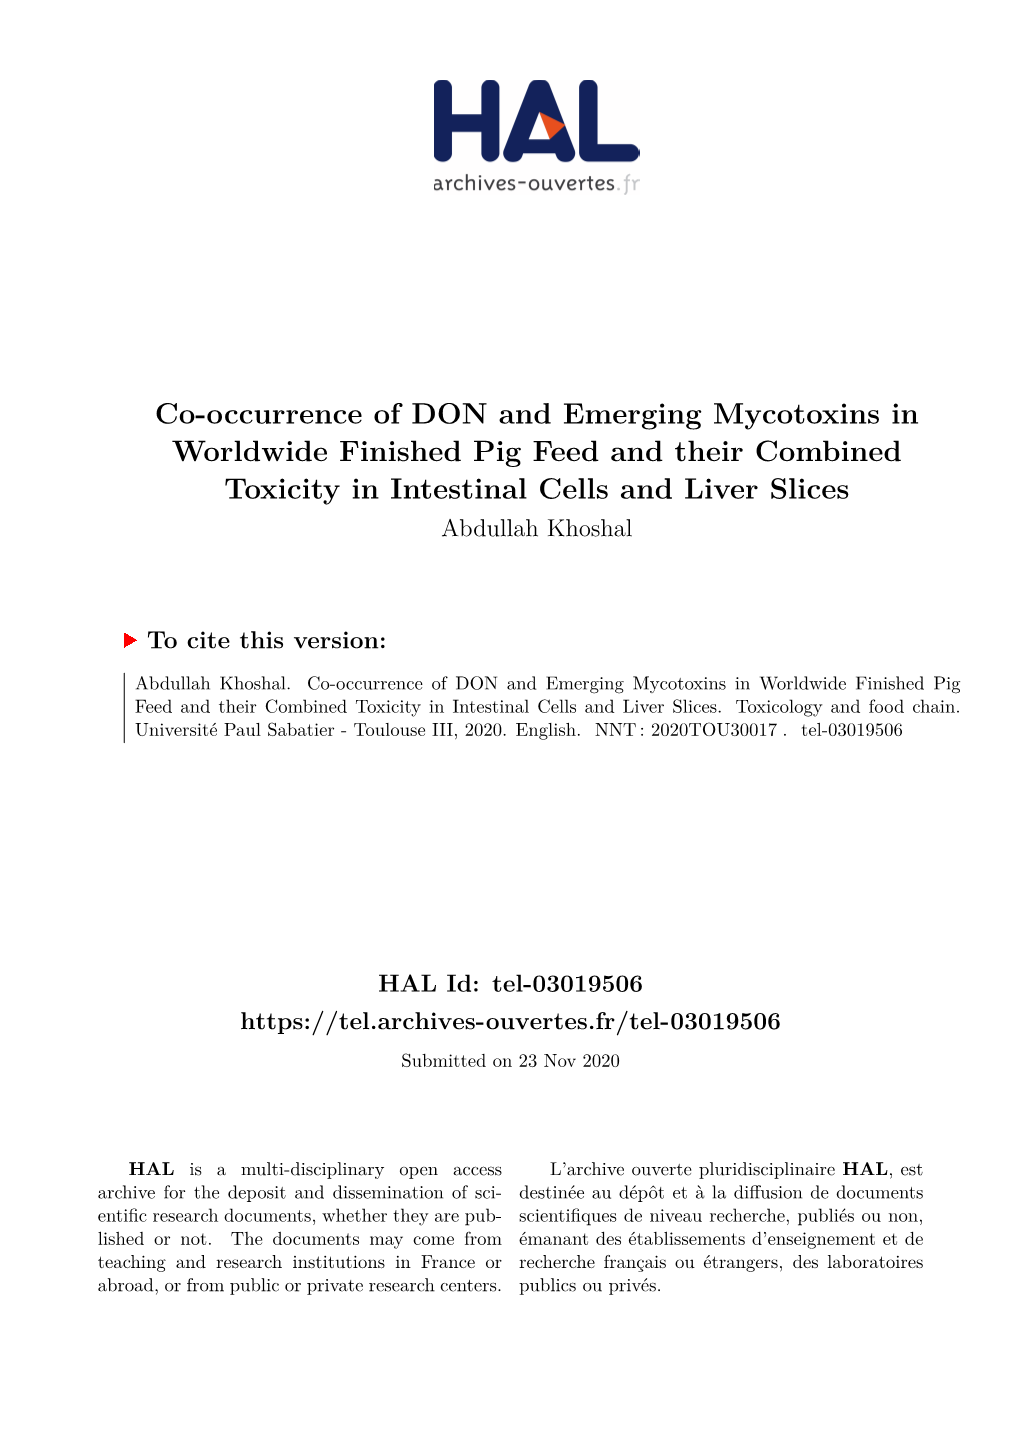 Co-Occurrence of DON and Emerging Mycotoxins in Worldwide Finished Pig Feed and Their Combined Toxicity in Intestinal Cells and Liver Slices Abdullah Khoshal